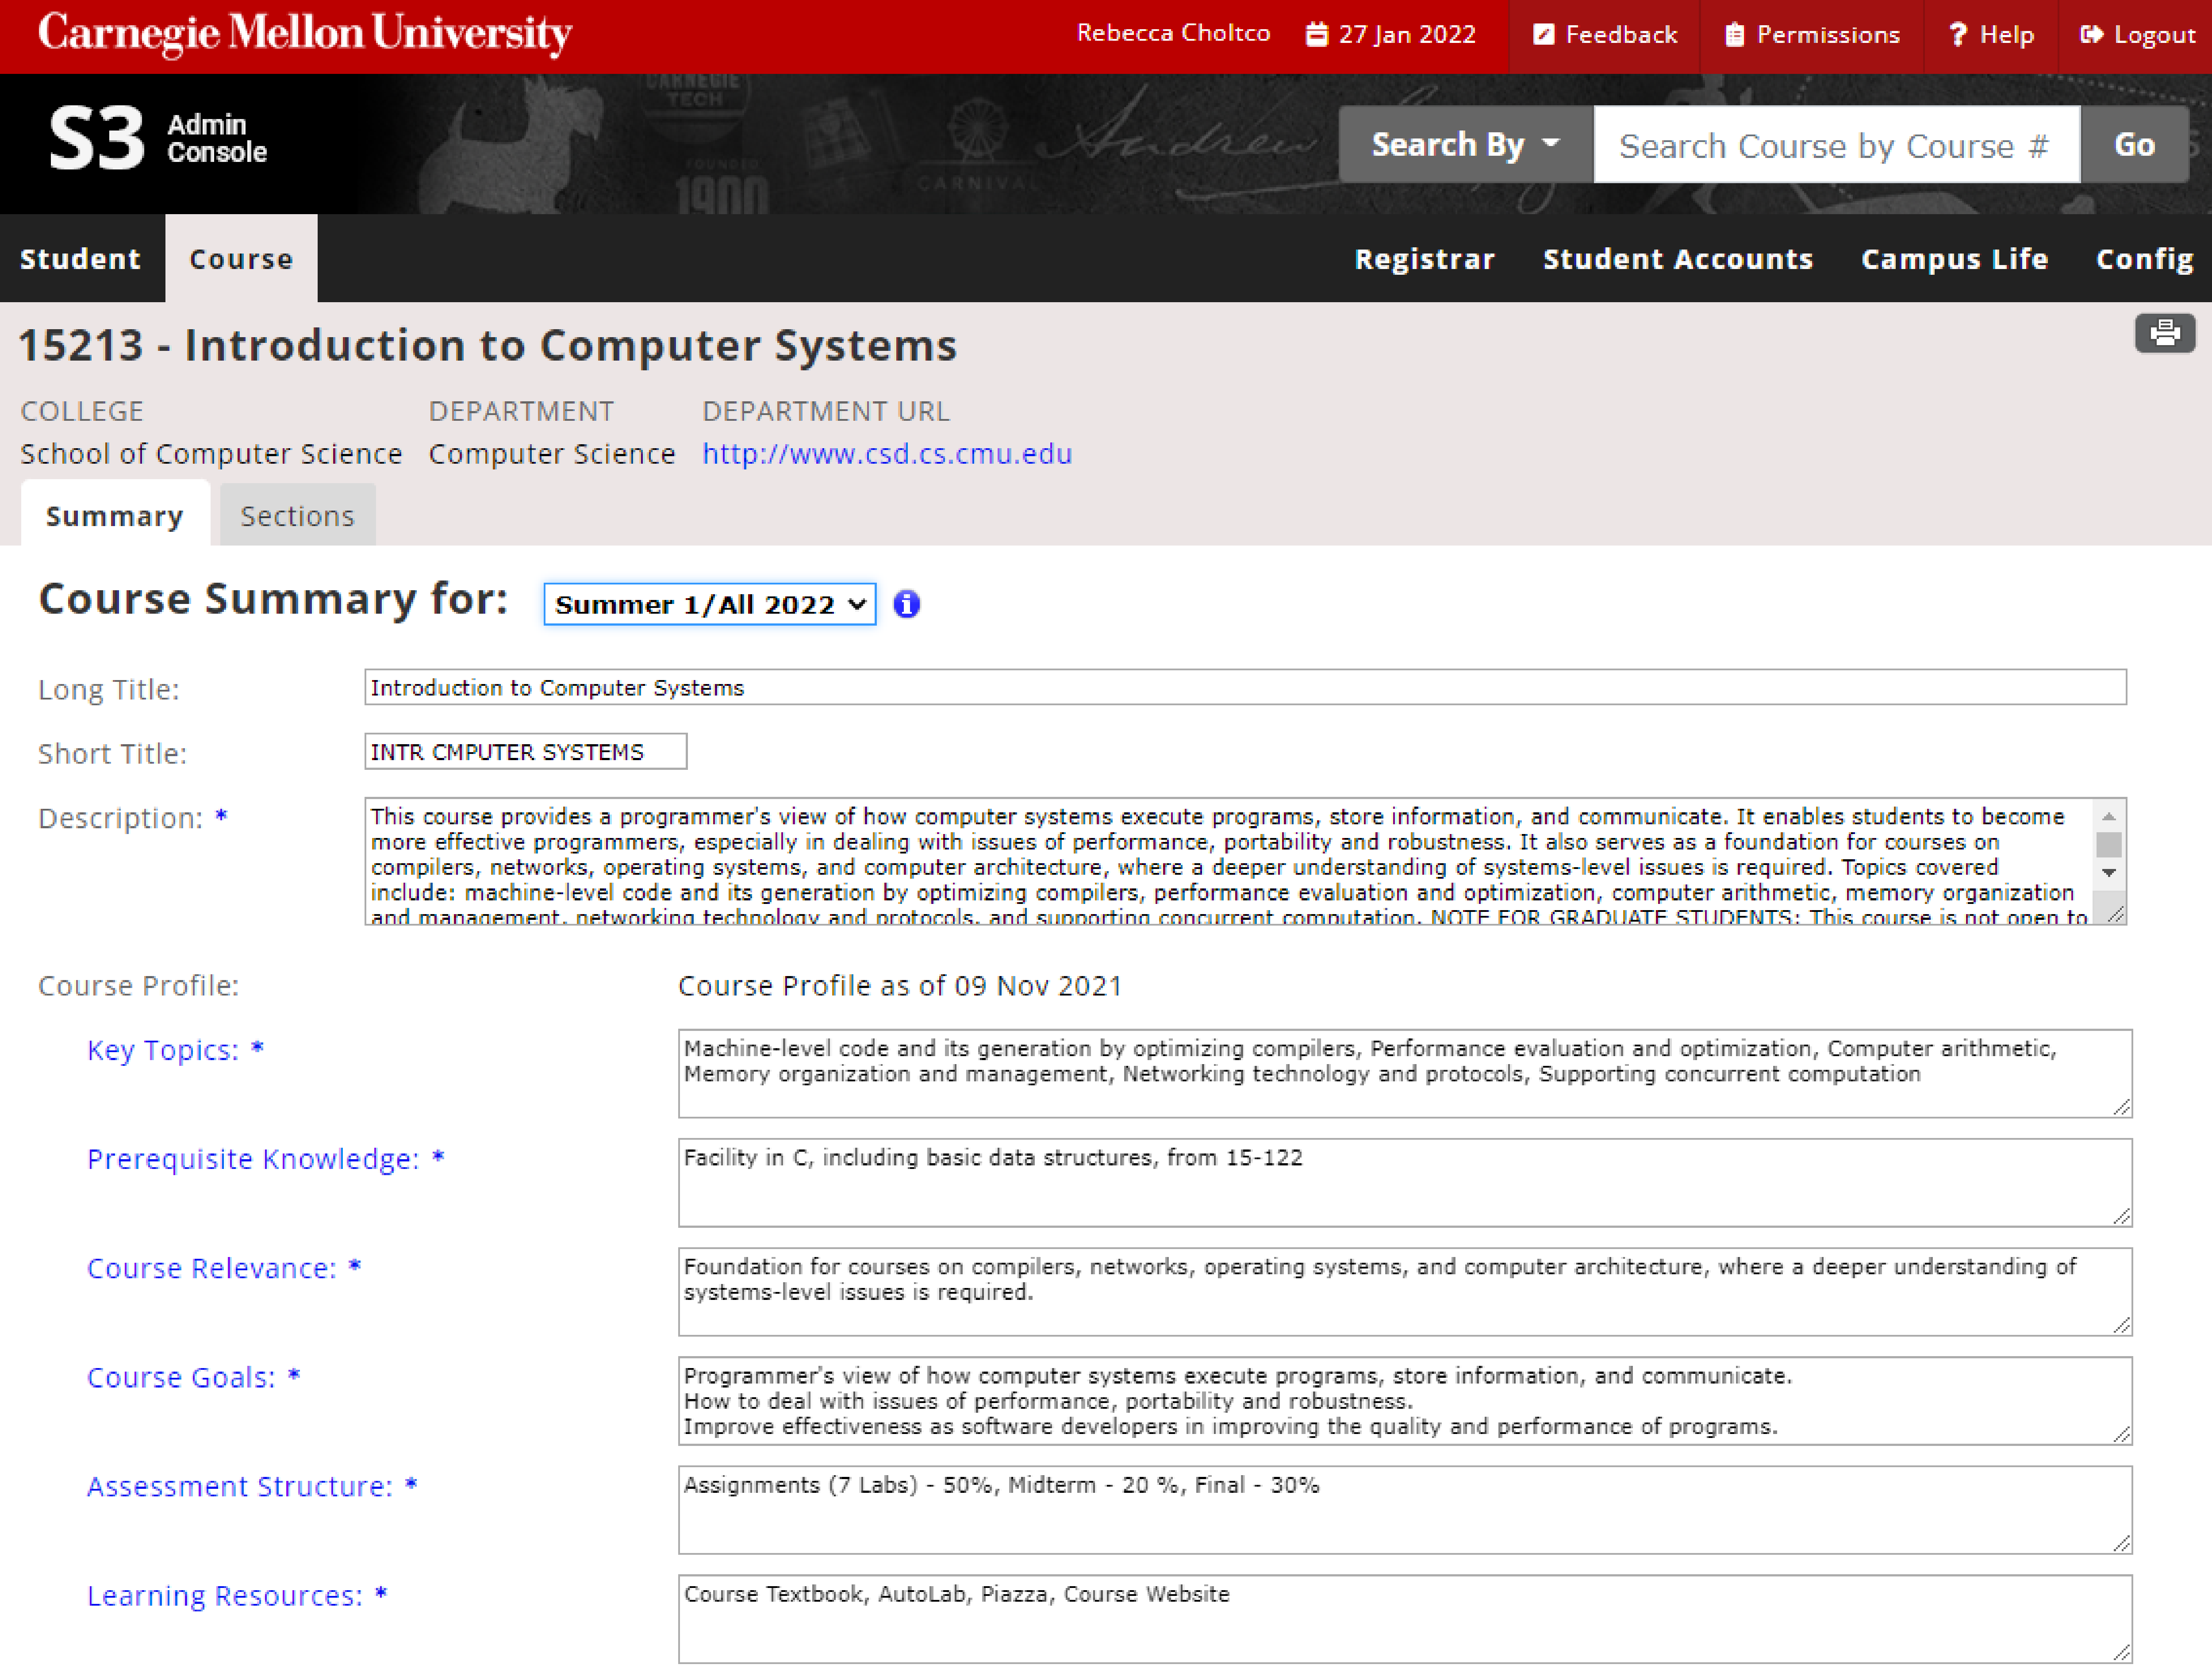 S3 admin platform course page, showing the increased font size and the wider screen view that appears across the platform